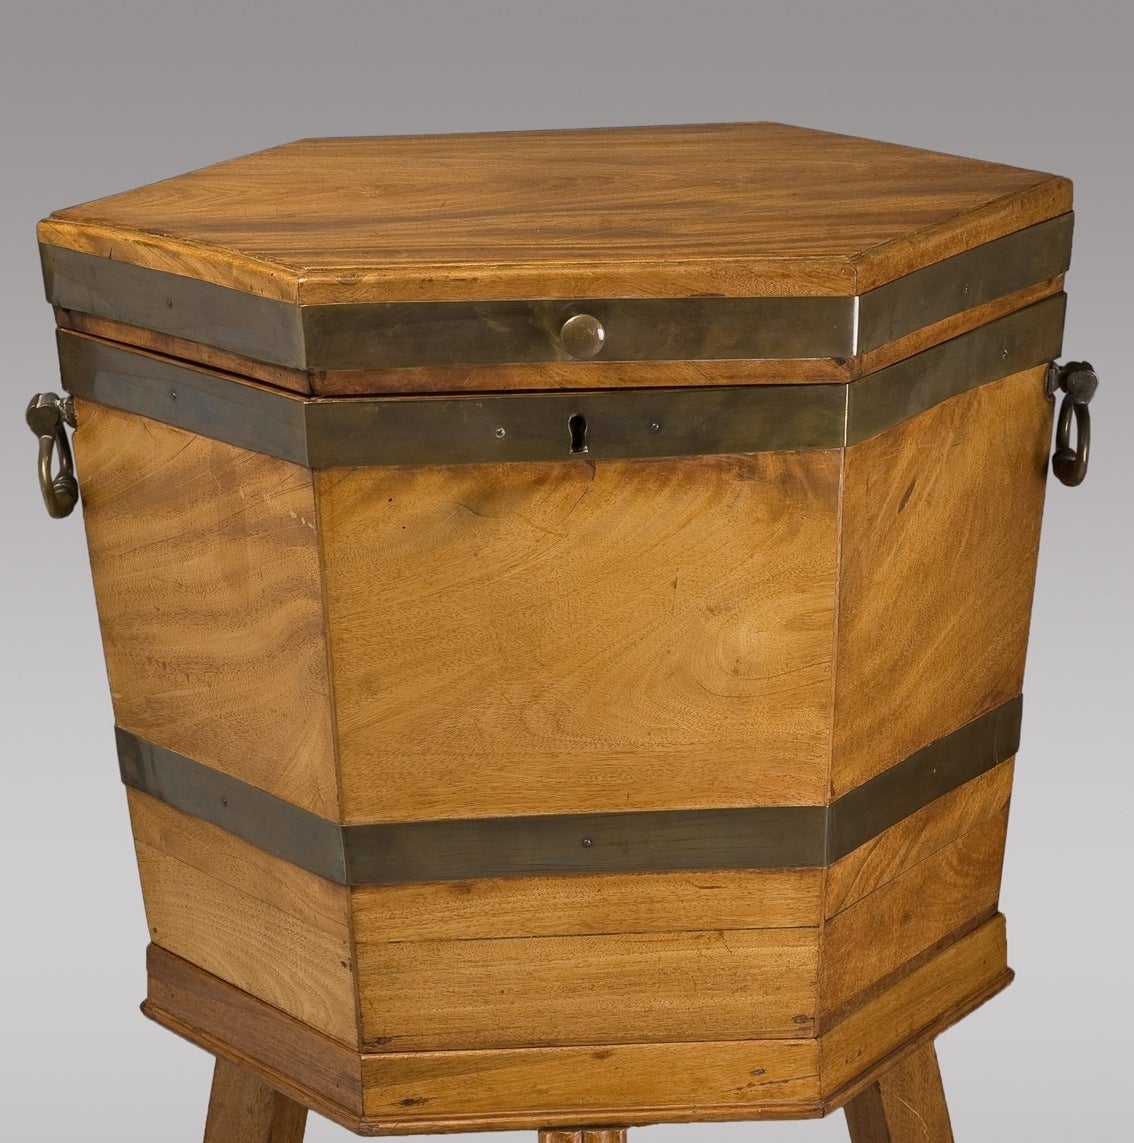 This antique mahogany wine cooler on stand was produced in England, circa1800 during the George III period. It features the original zinc interior, with mahogany exterior and bronze details.